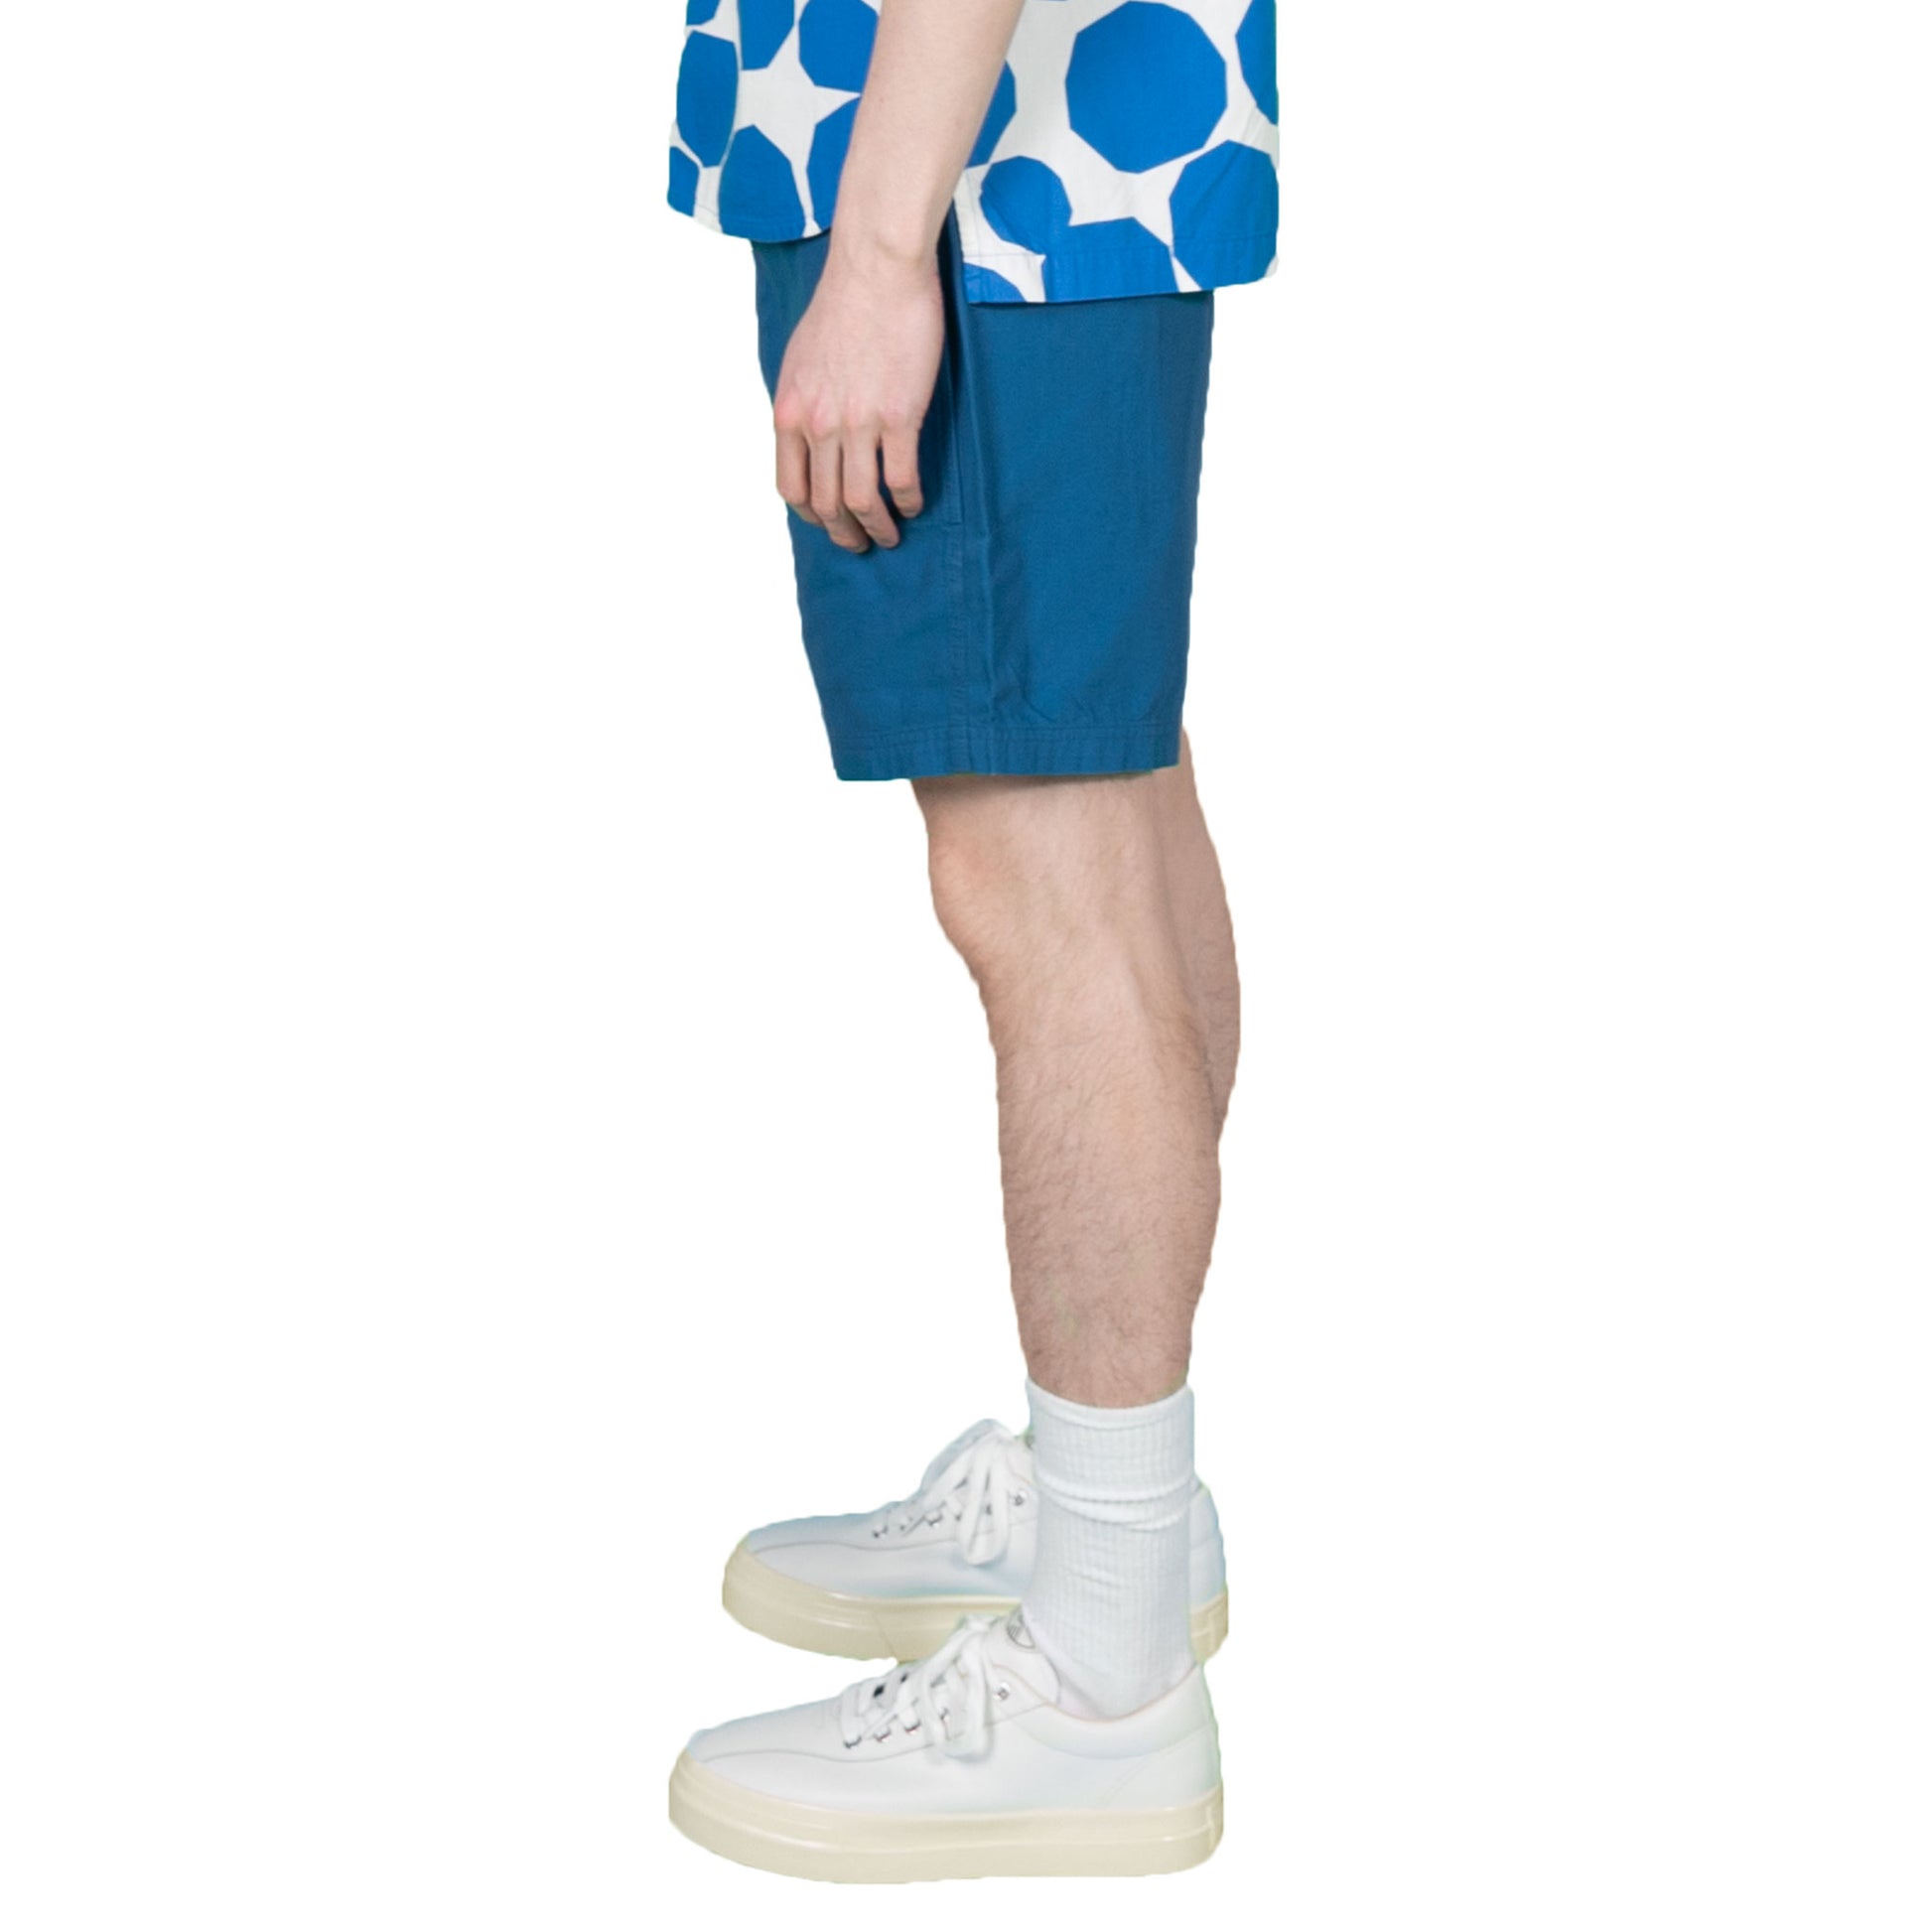 Garbstore Home Party Short in Petrol Blue